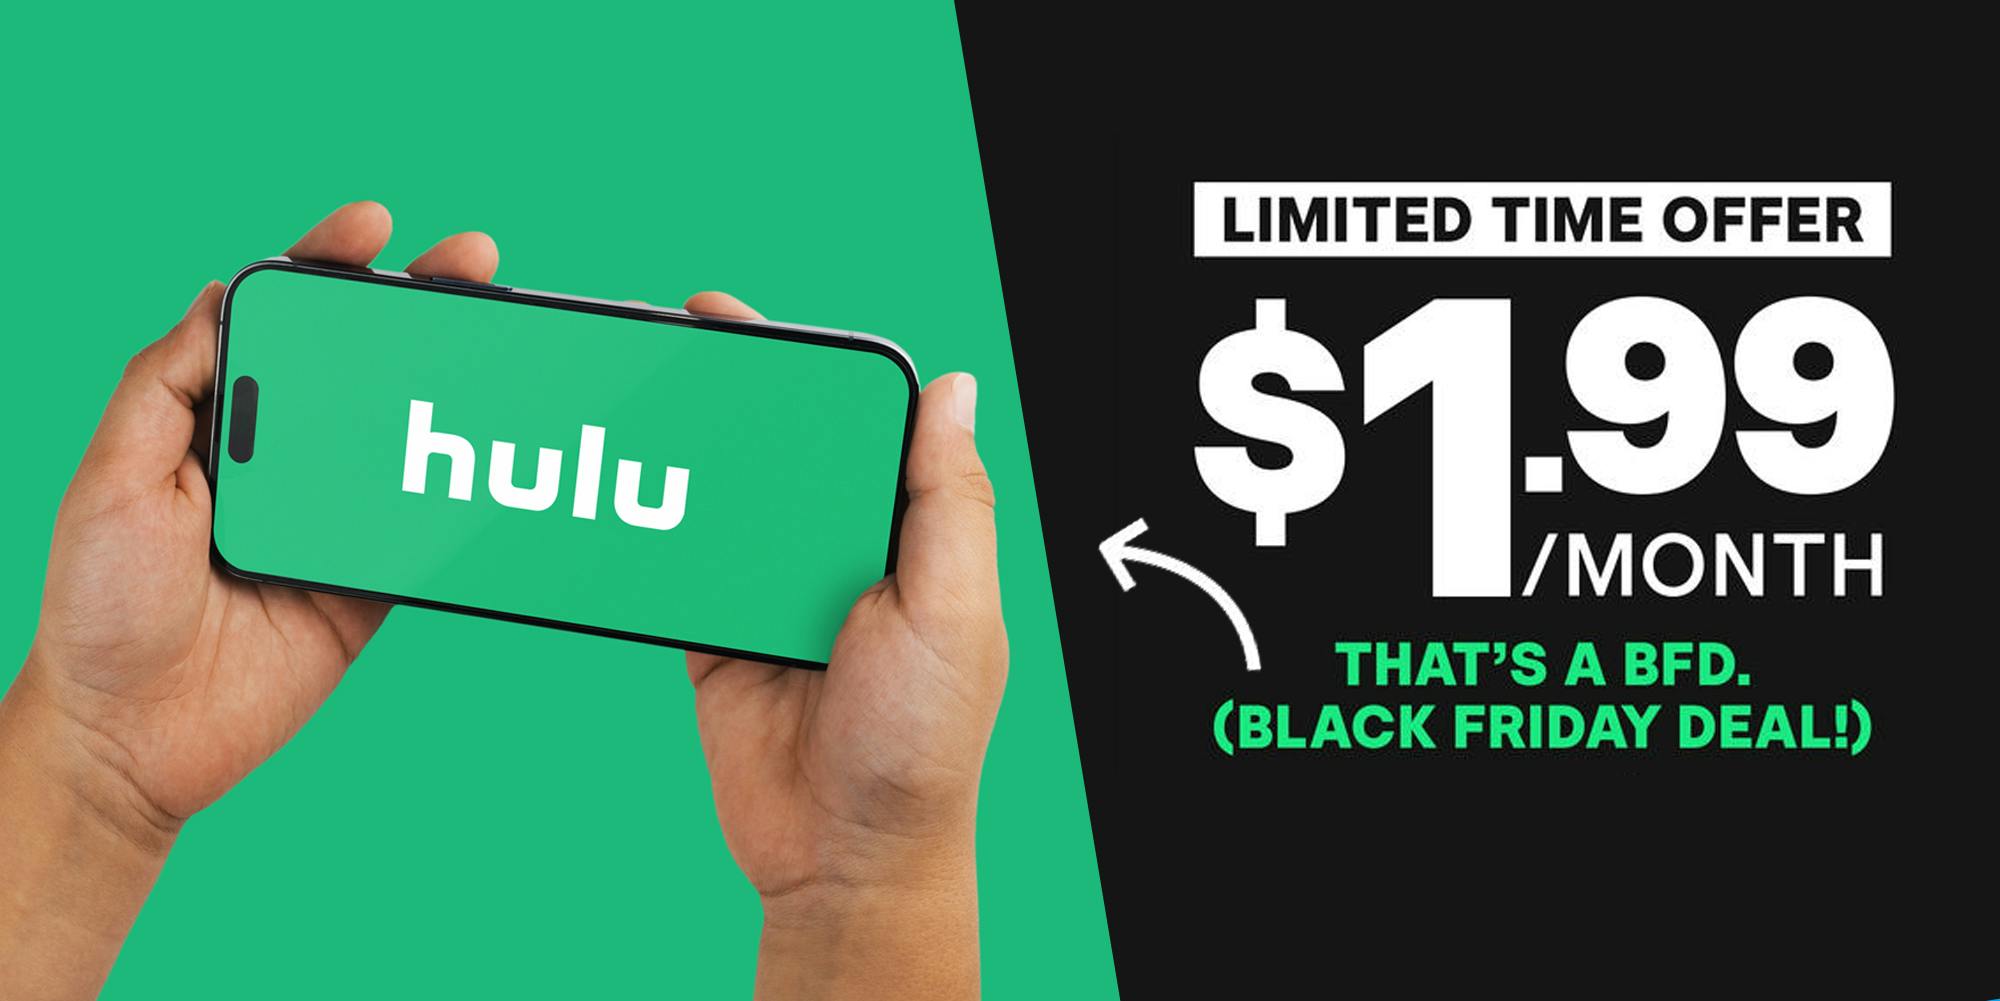 hands holding Hulu on phone screen over green background with dark grey oblique ad caption "LIMITED TIME OFFER $1.99/MONTH THAT'S A BFD (BLACK FRIDAY DEAL) on right